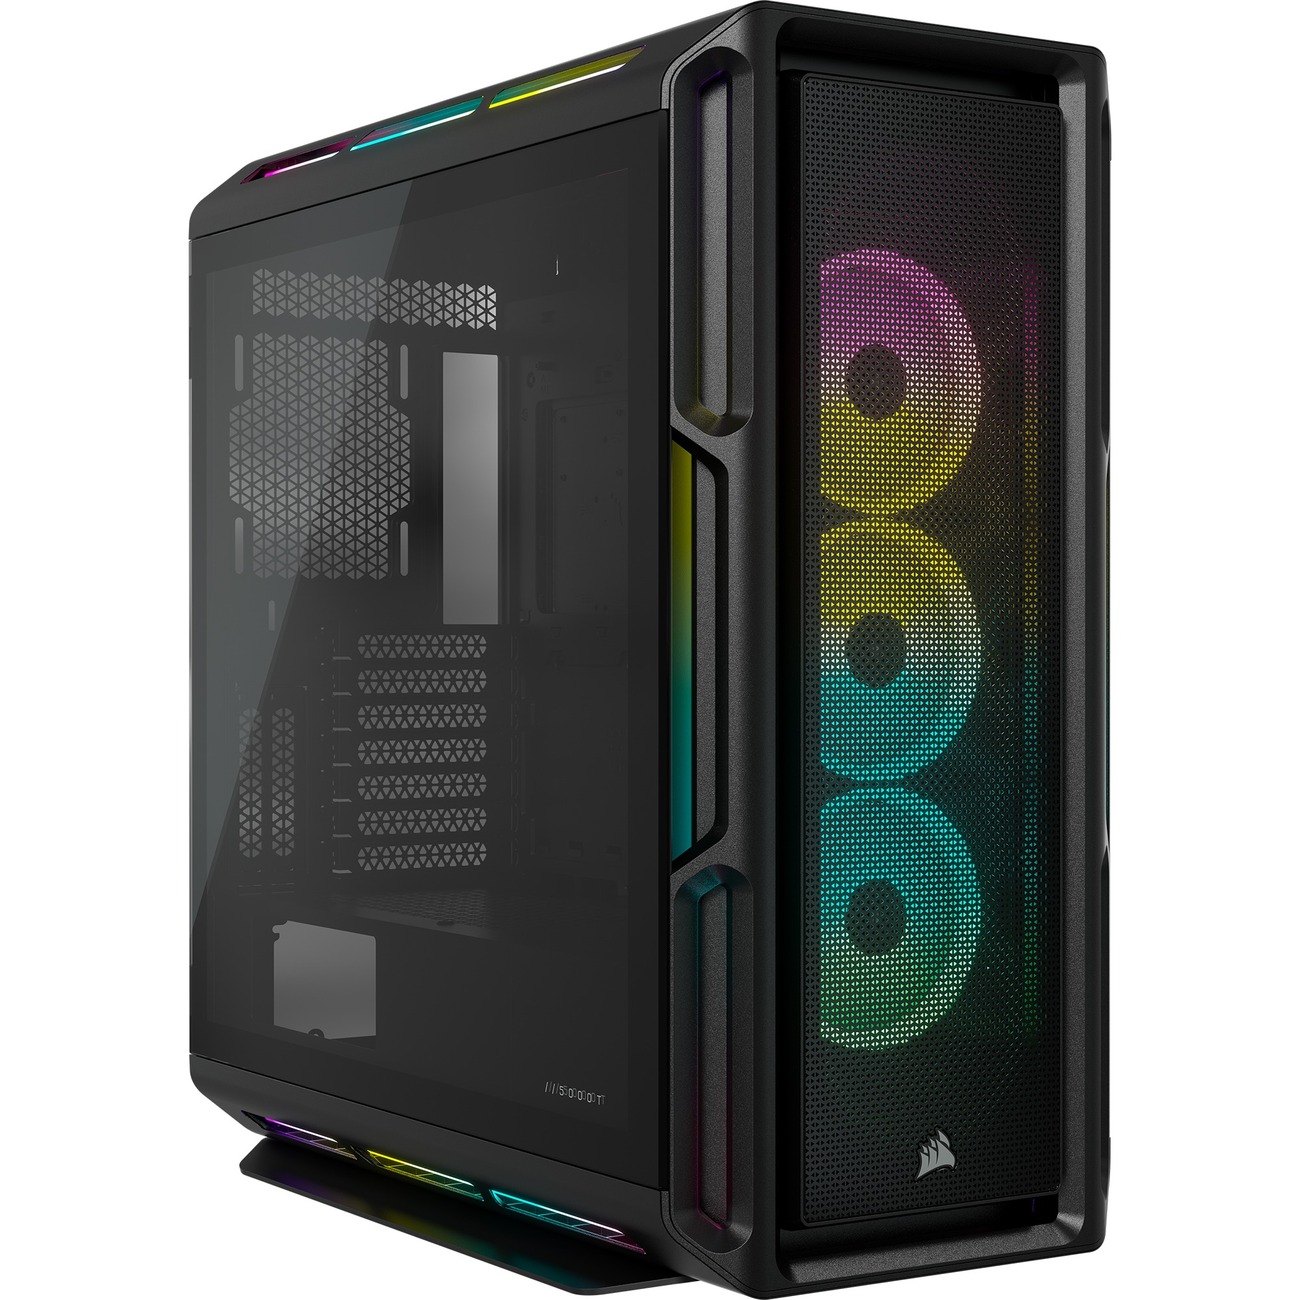 Corsair iCUE 5000T RGB Tempered Glass Mid-Tower ATX PC Case